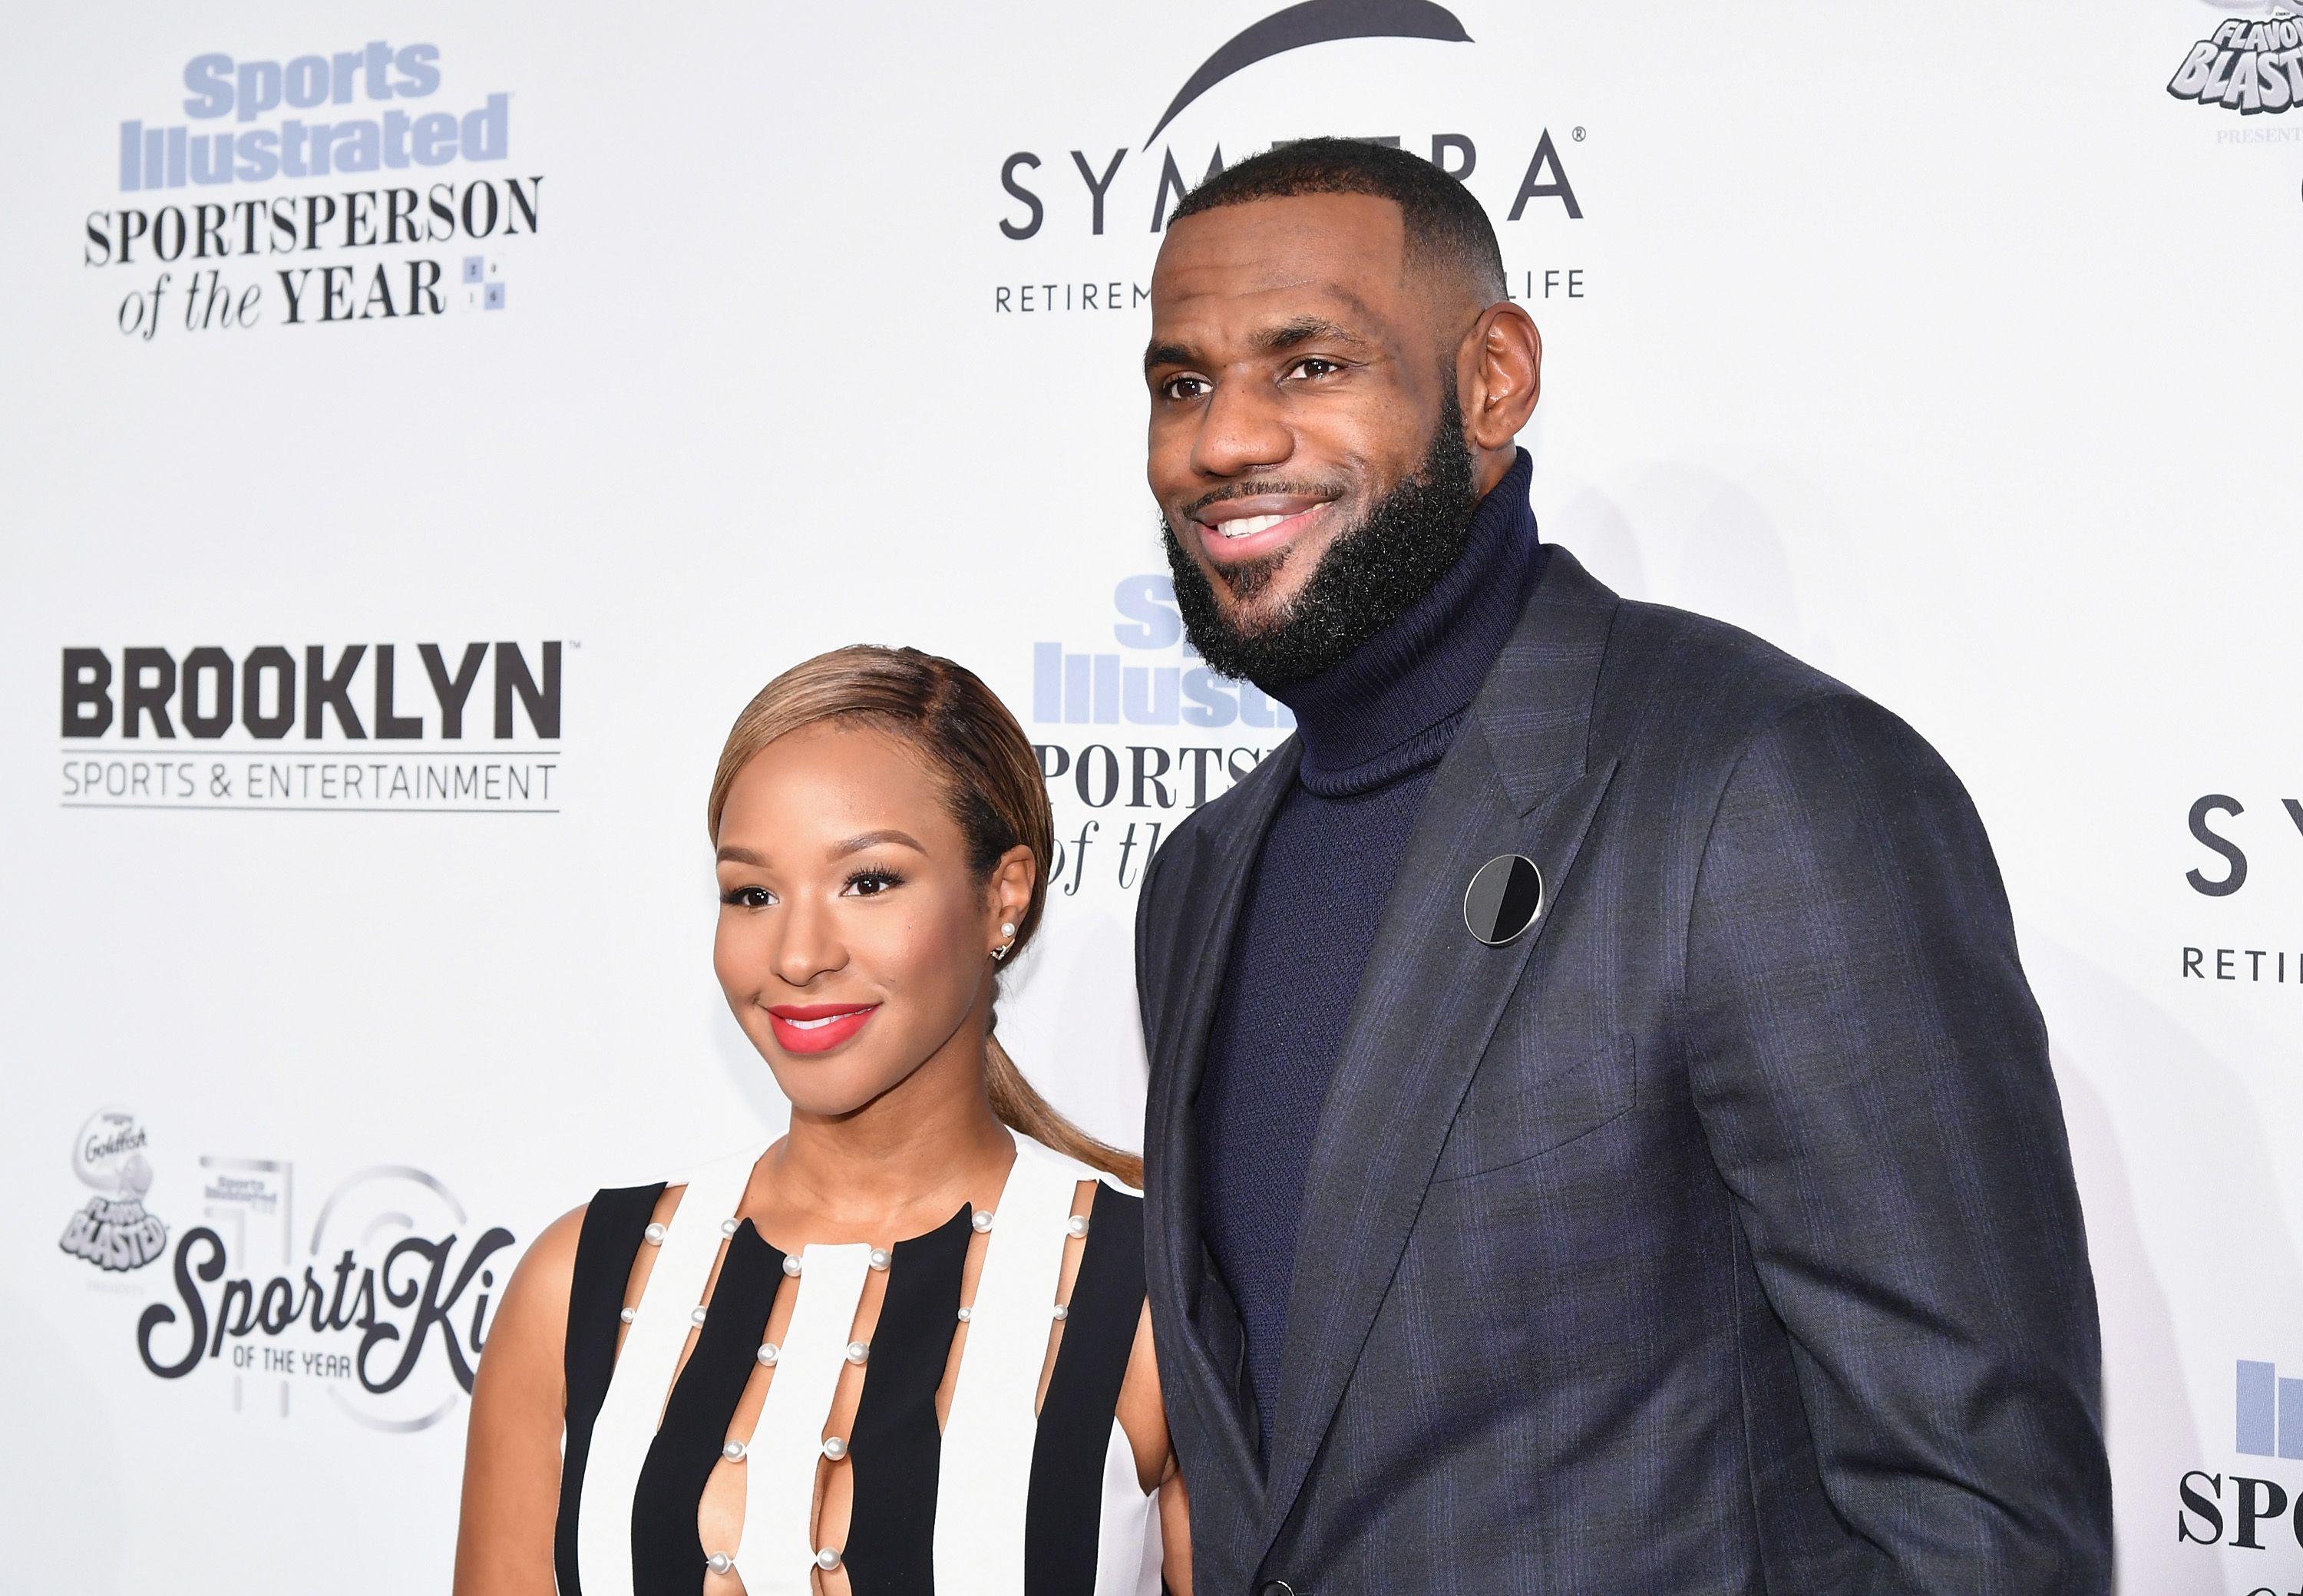 Savannah and LeBron James at the Sports Illustrated Sportsperson of the Year Ceremony on December 12, 2016 in New York. | Photo: Getty Images